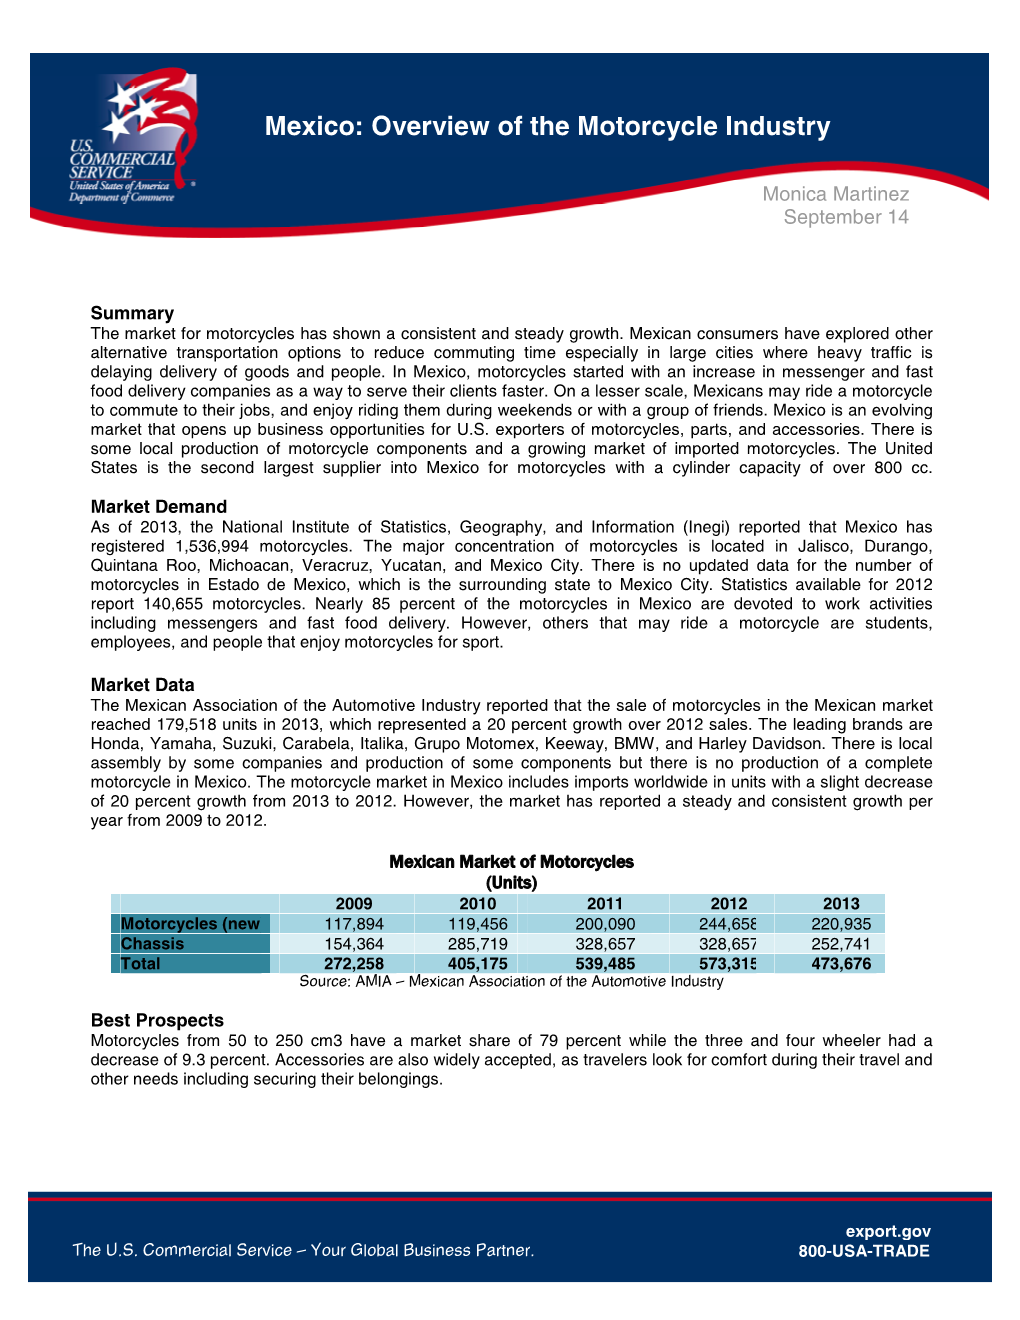 Mexico: Overview of the Motorcycle Industry Page 1 of 4 Mexico: Overview of the Motorcycle Industry